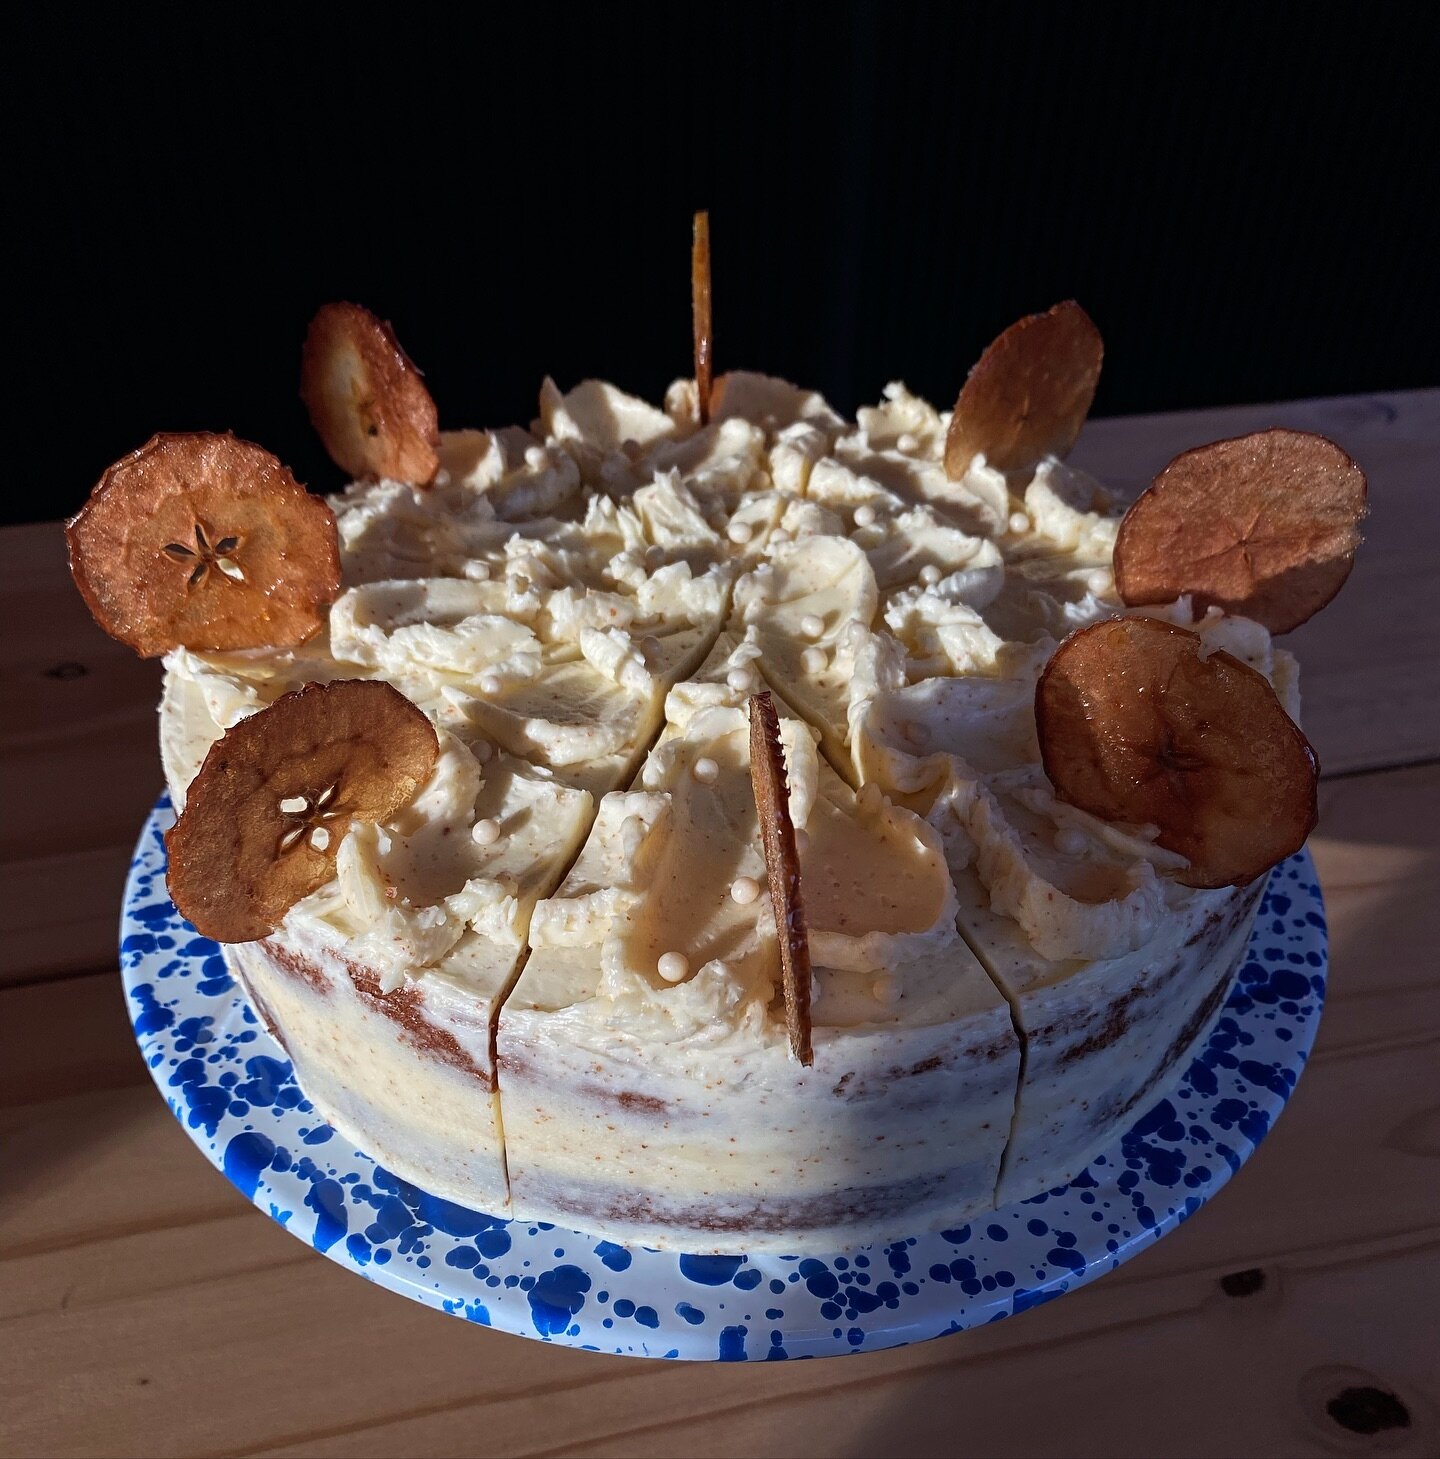 Lots of goodies for you this morning! Calling this one Sundial Apple Cake - apple cider cake, brown butter buttercream, caramelized apples &amp; white chocolate crunch. See you at @tenmiletable :*